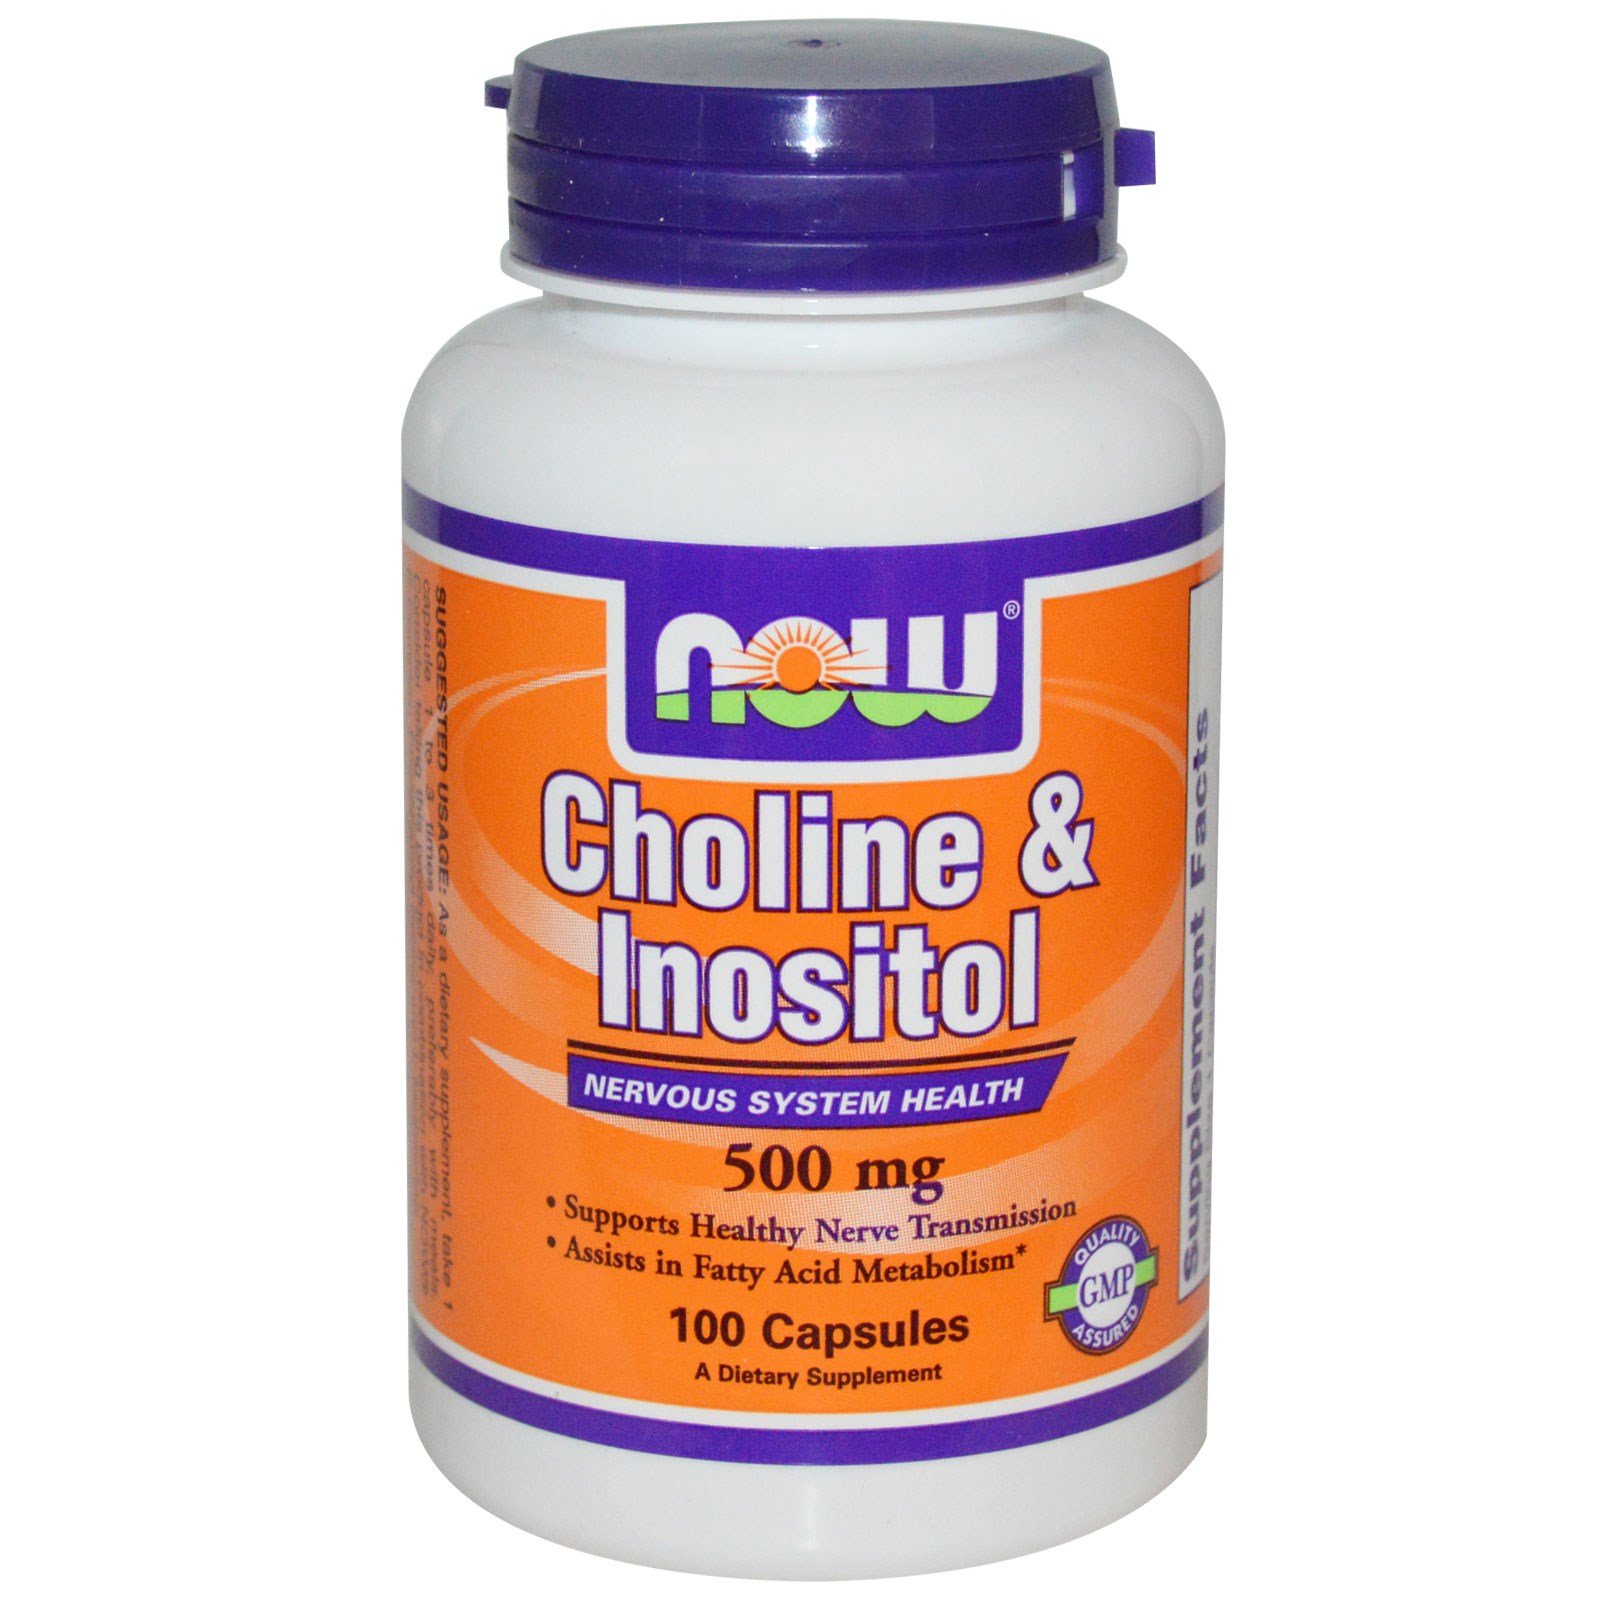 Choline & Inositol, 100 pcs, Now. Special supplements. 